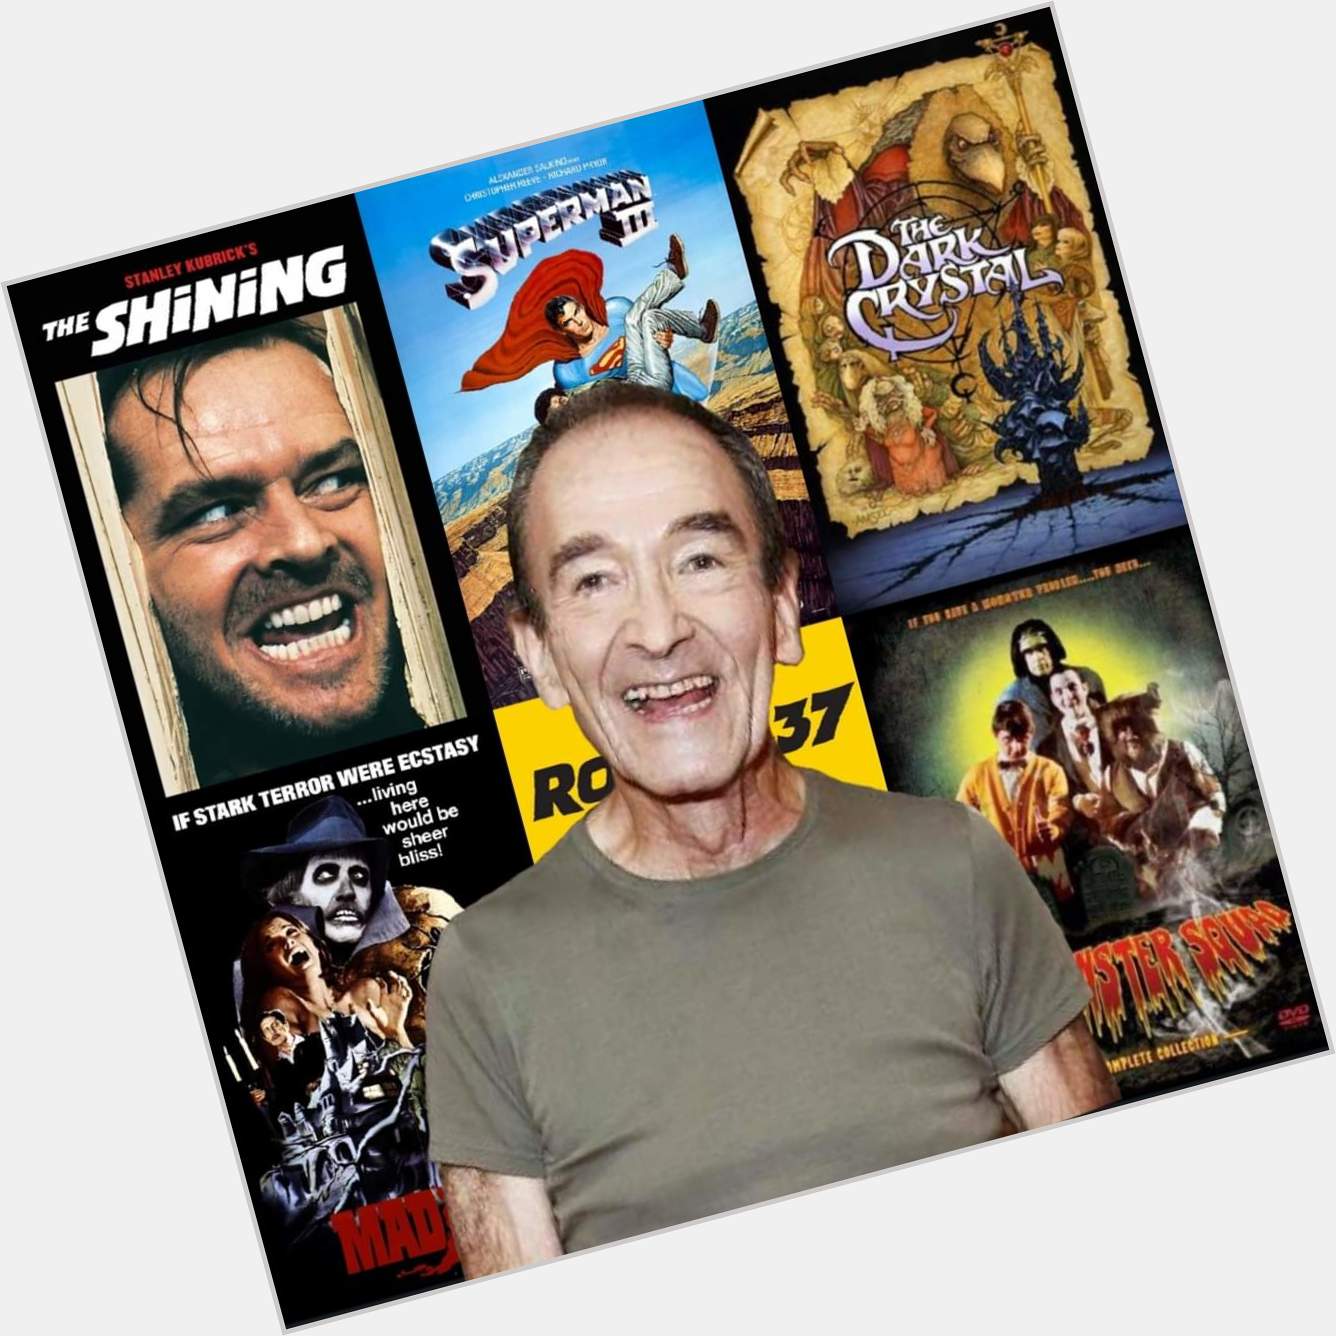 Happy birthday to the late
Barry Dennen.
RIP     